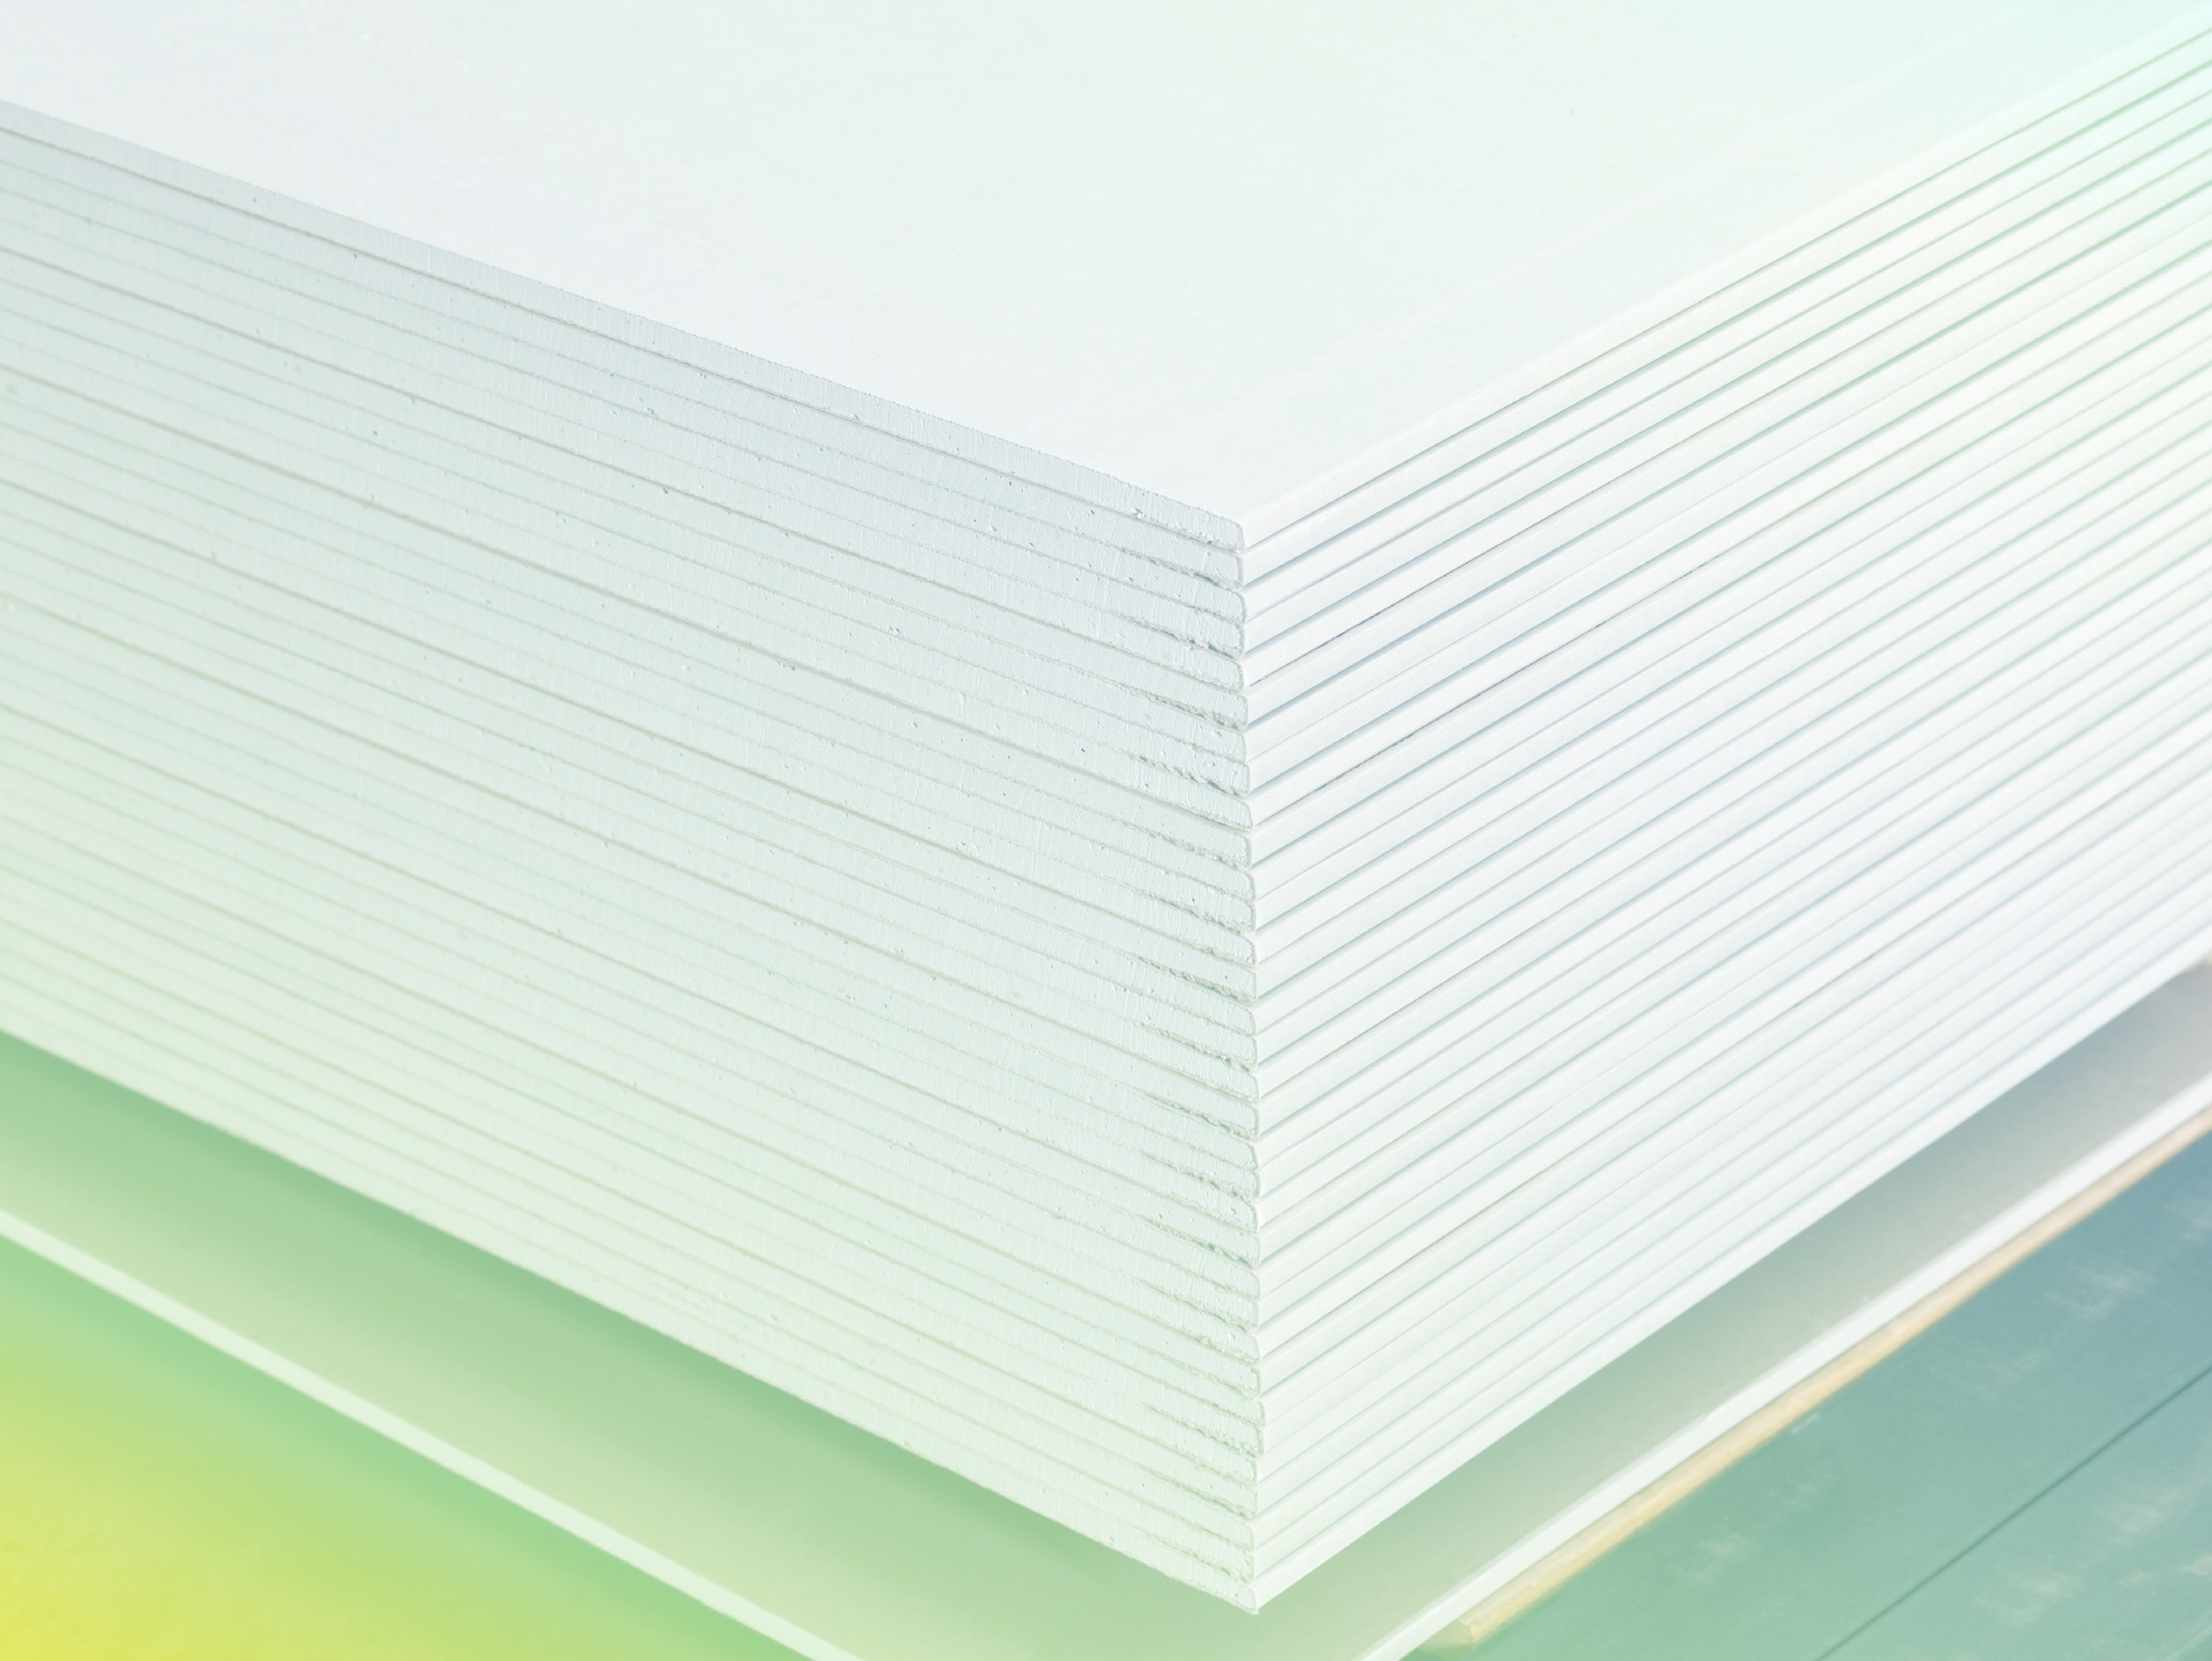 New white papers offer best choices in drywall, flooring, and insulation for embodied carbon and health impacts